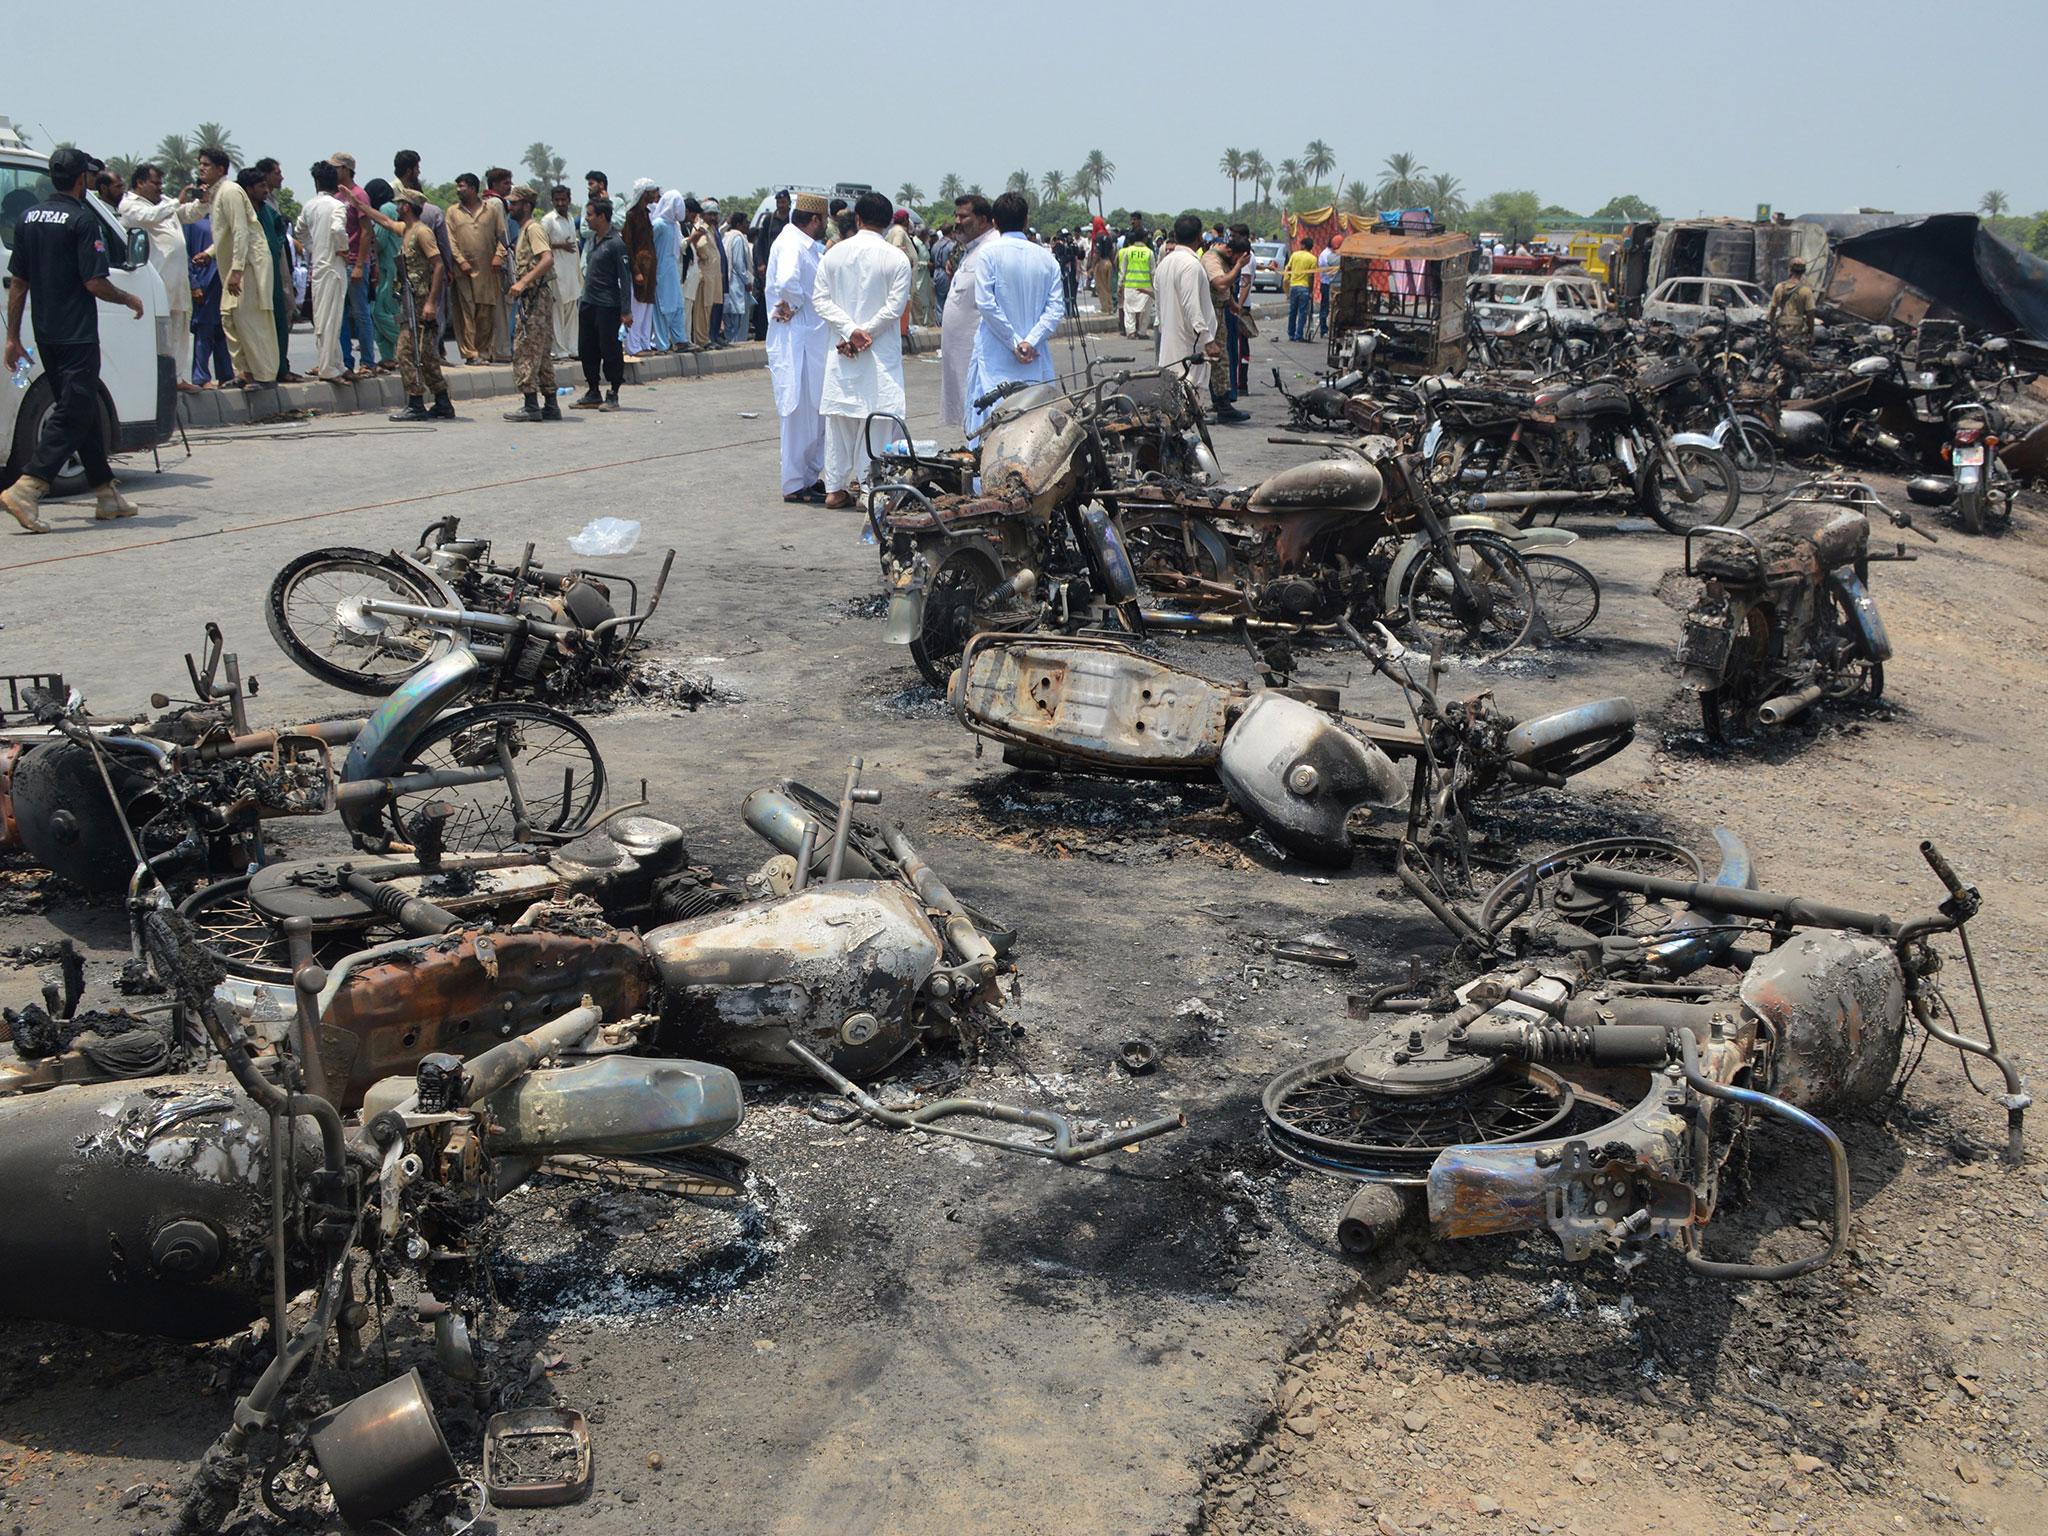 People gather behind burnt motorcycles and vehicles at the scene of an Oil tanker accident on the outskirts of Bahawalpur, Pakistan